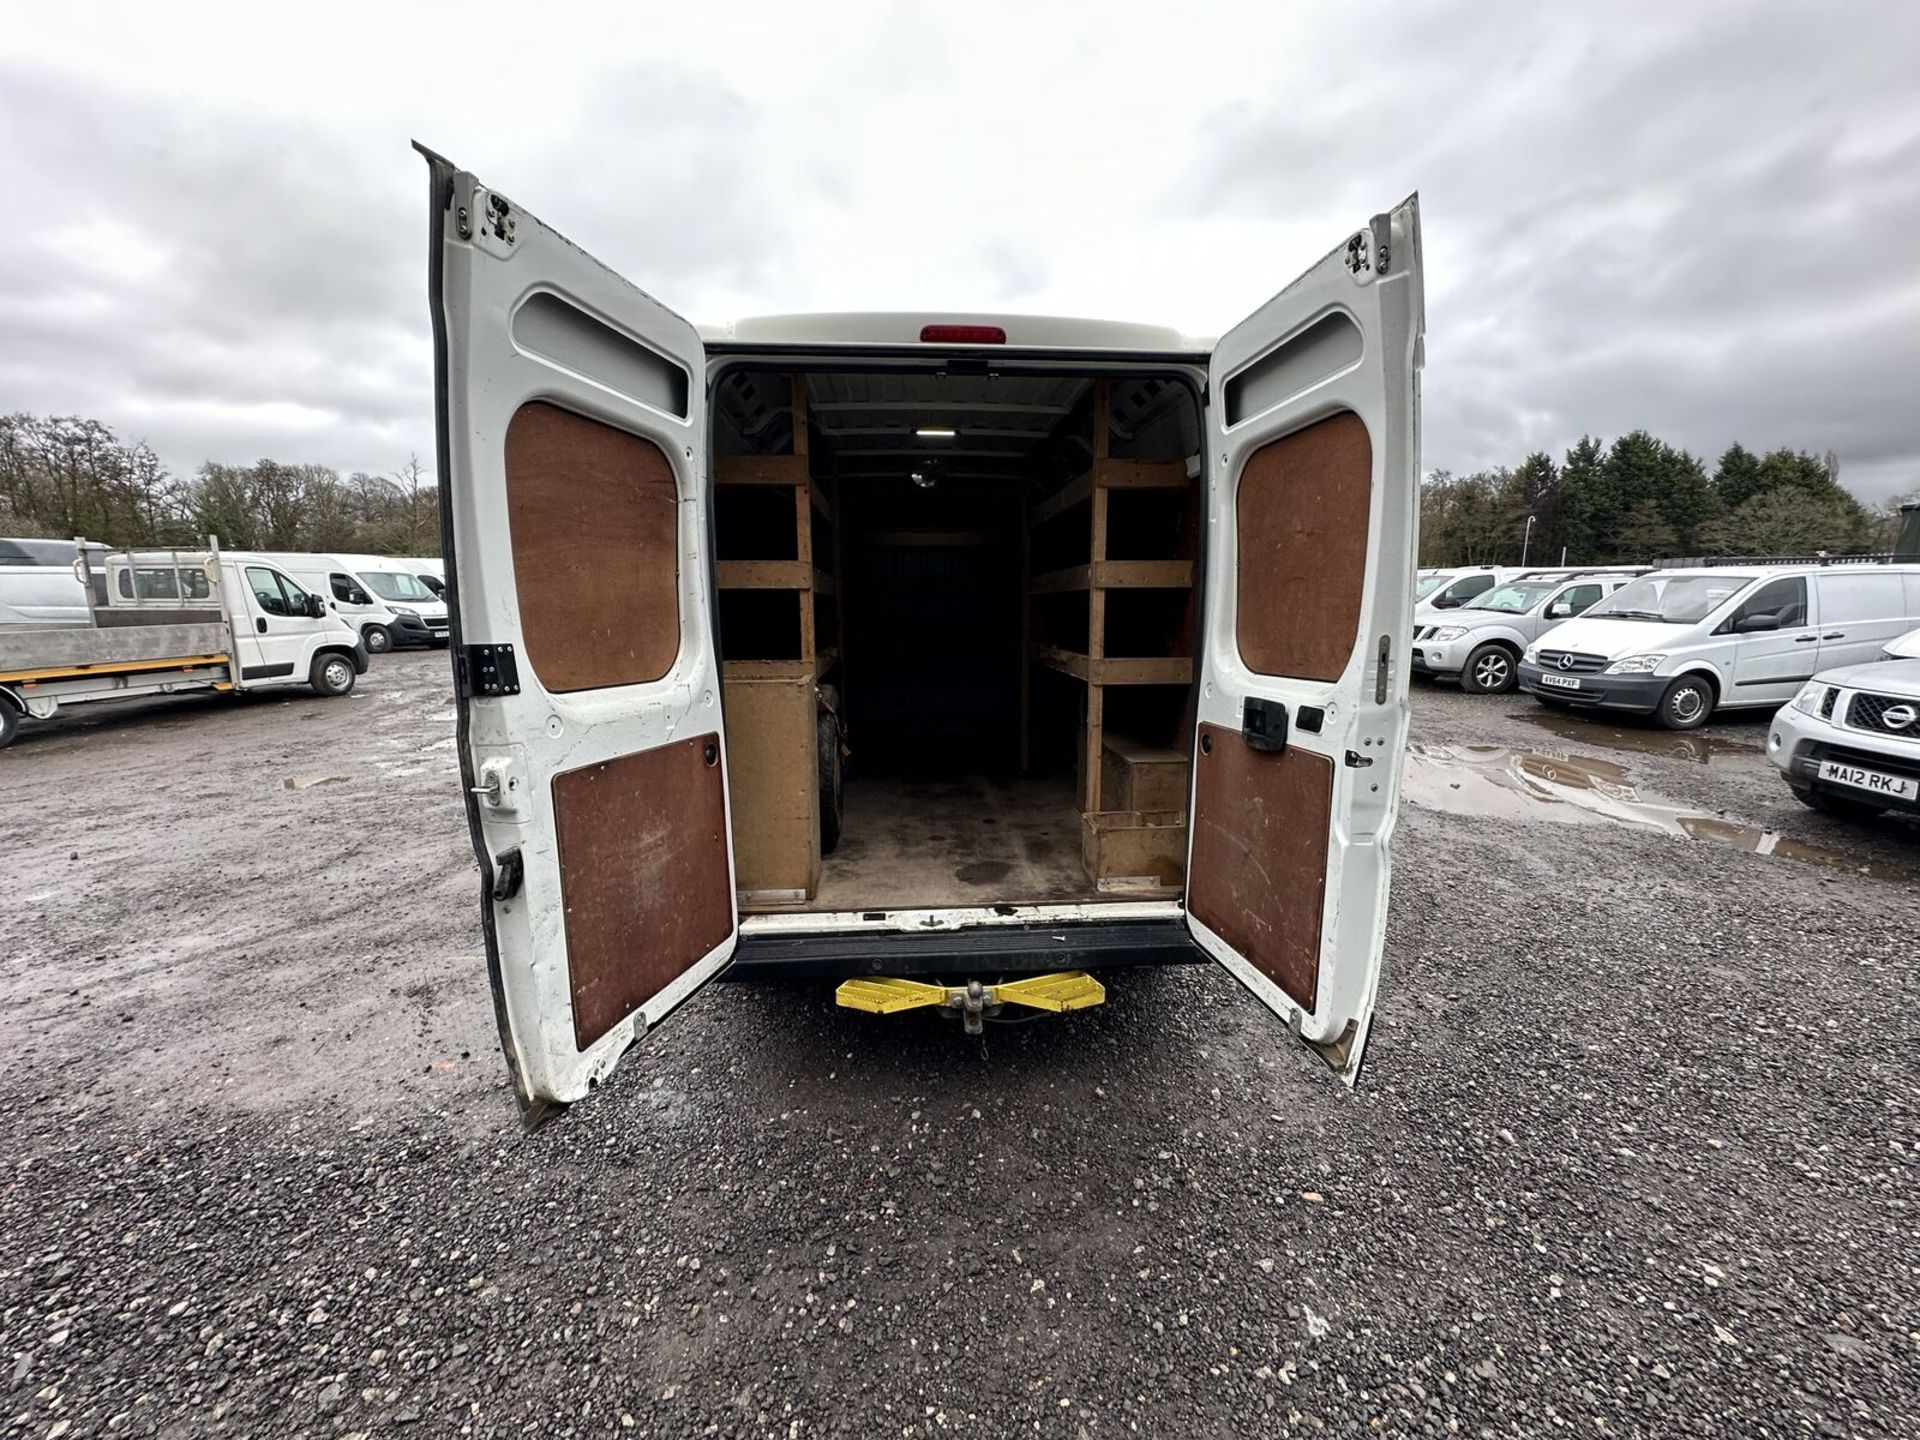 69 PLATE PEUGEOT BOXER: BLUE HDI POWER, READY FOR DUTY - Image 14 of 19